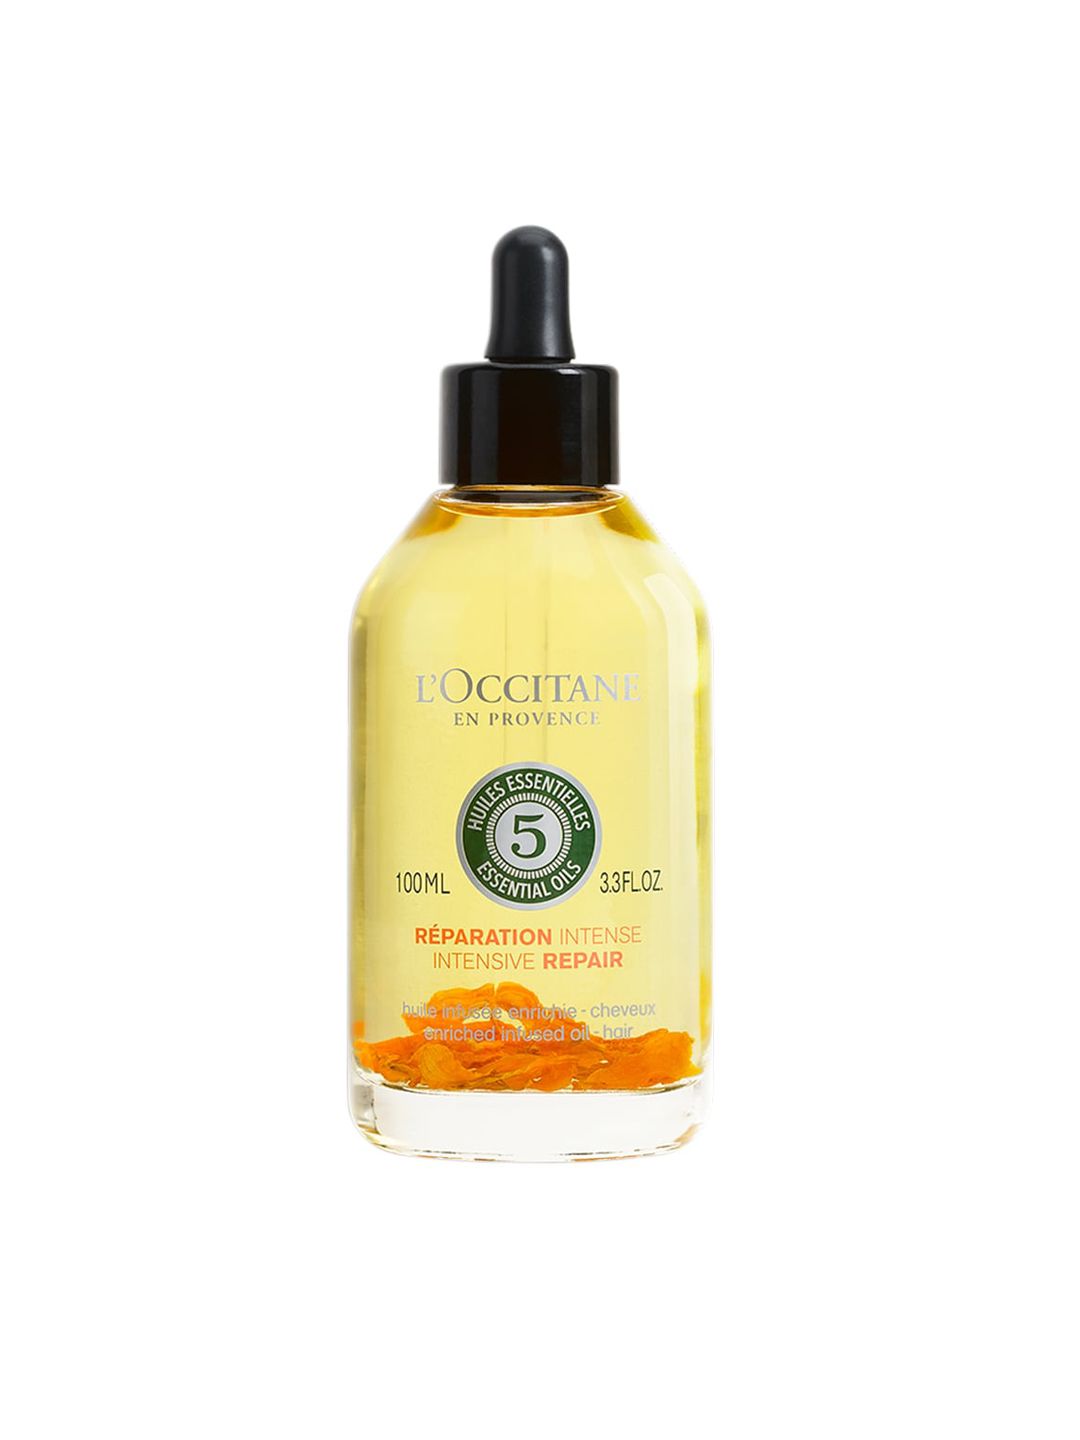 L'Occitane en Provence Intensive Repair Enriched Infused Oil 100ml Price in India